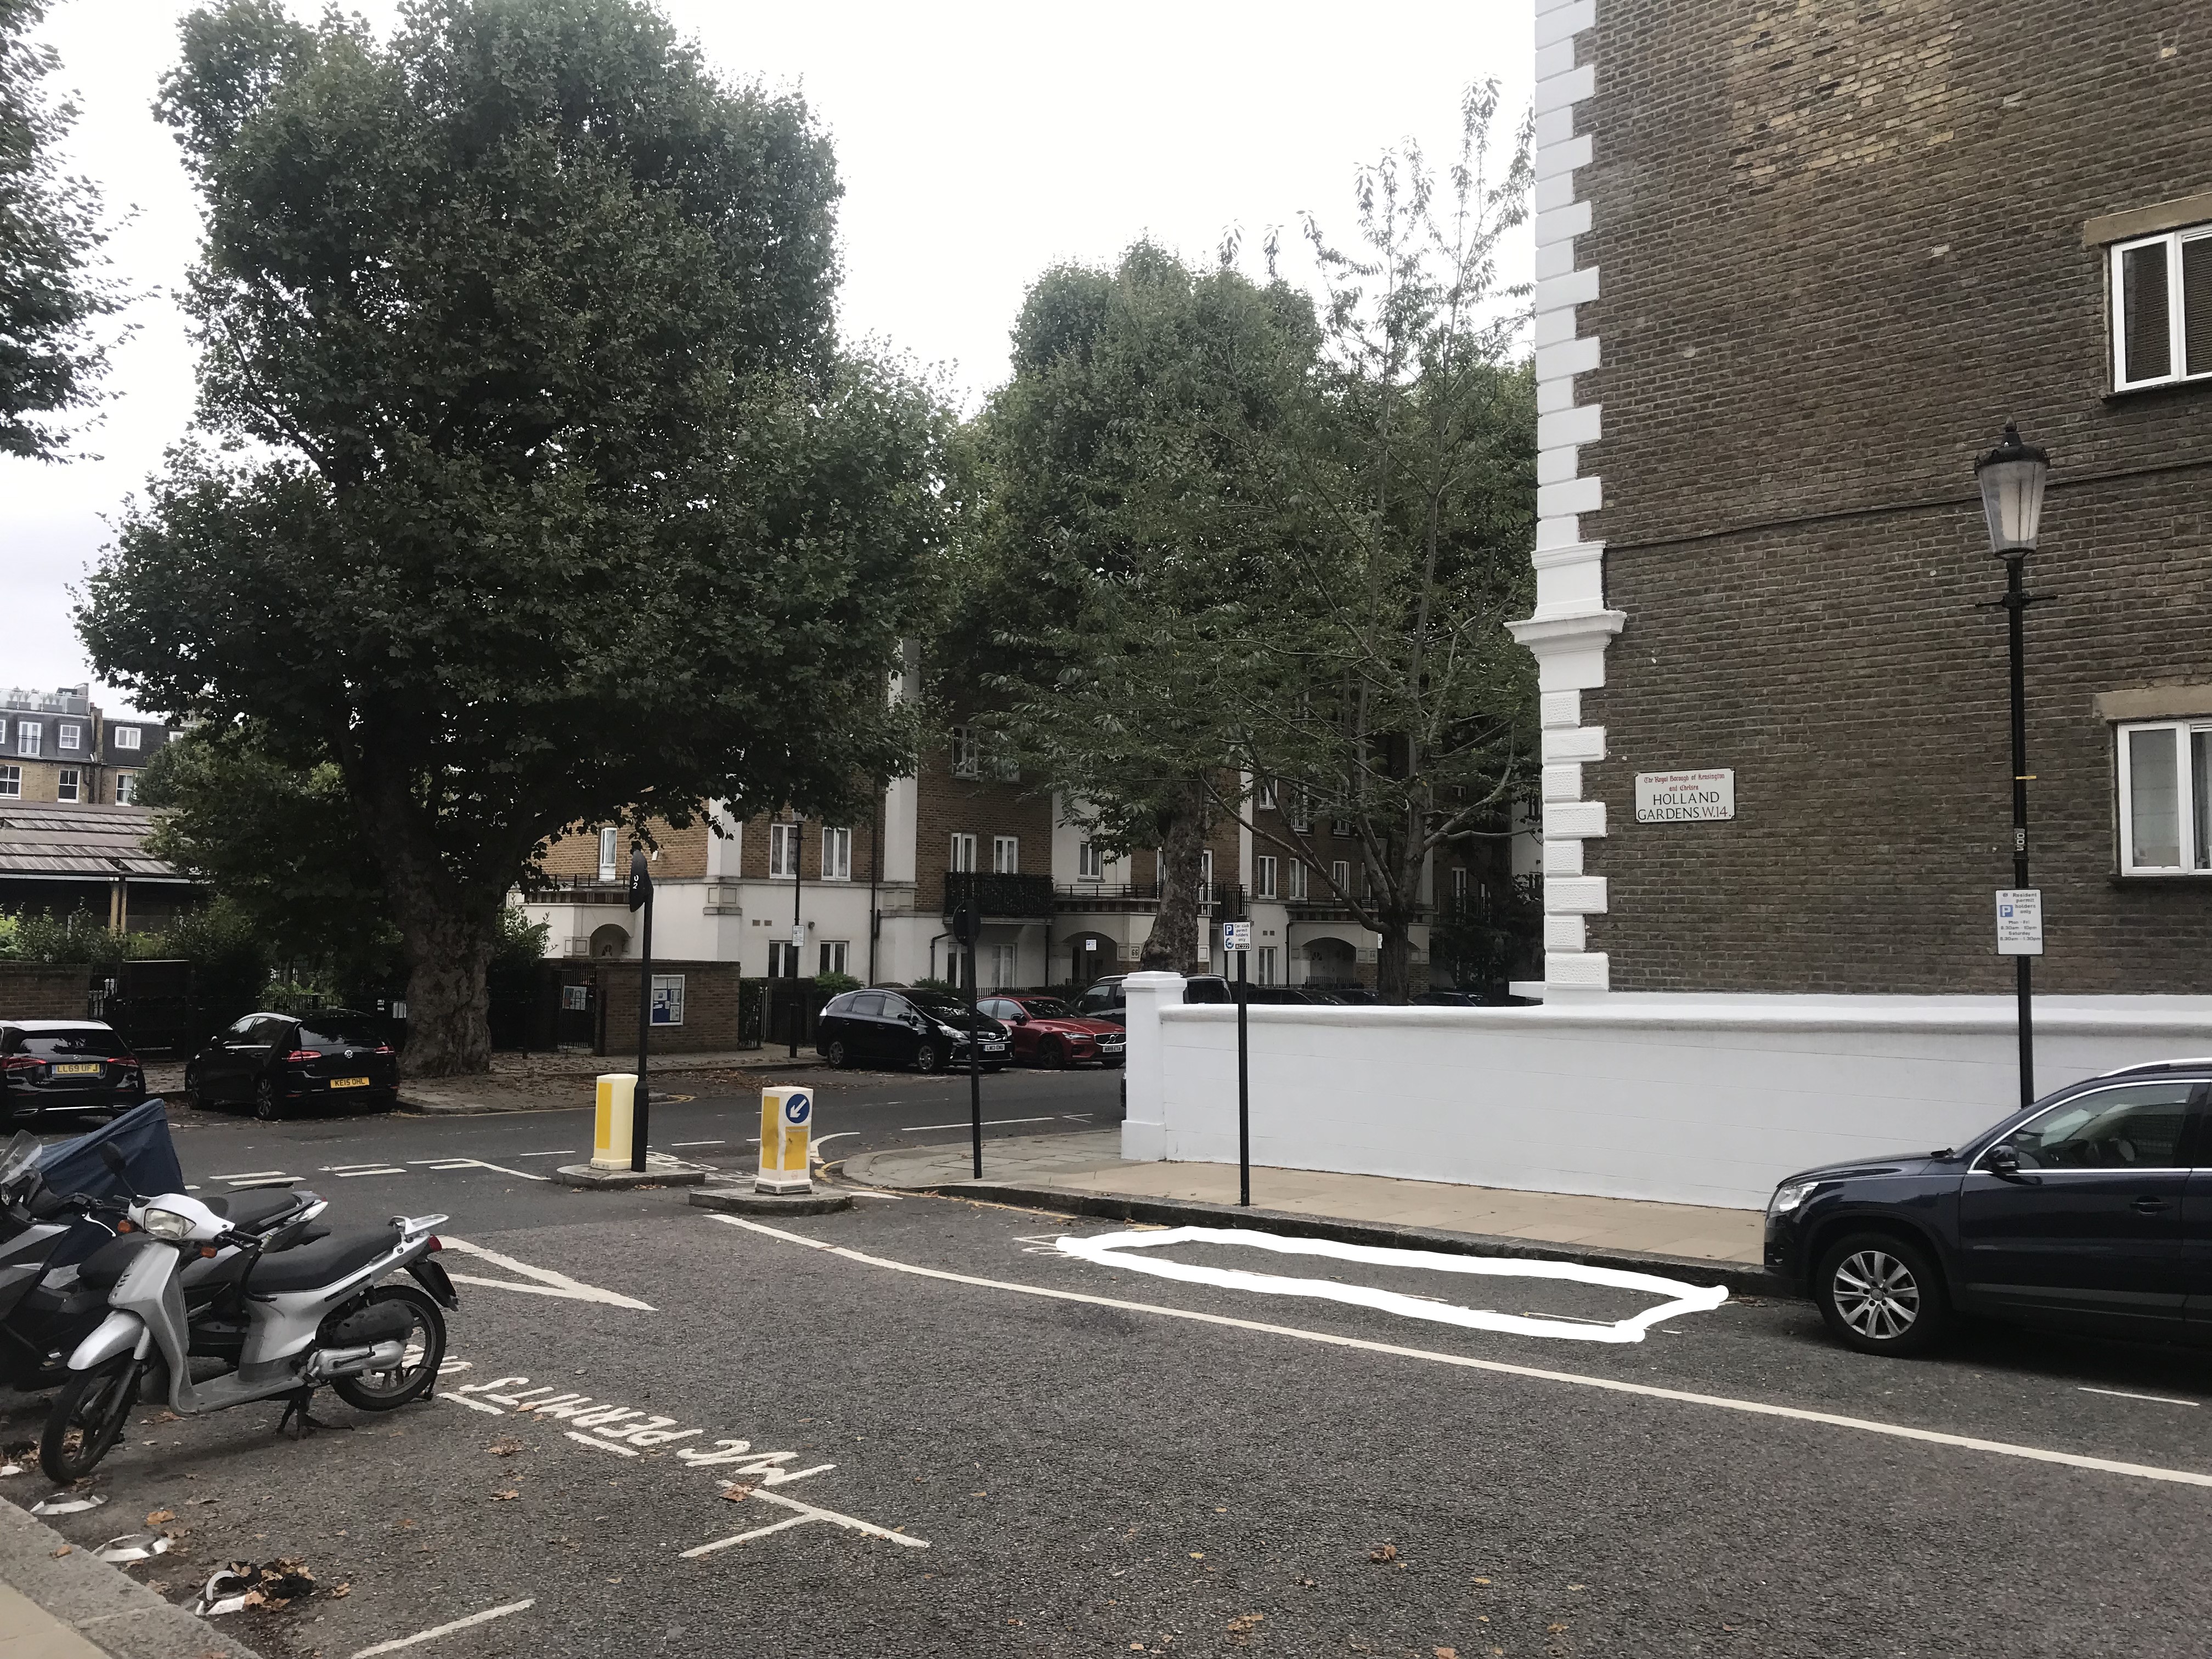 The proposed bay is on the carriageway outside the flank wall of 36 Russell Road, situated in Holland Gardens.